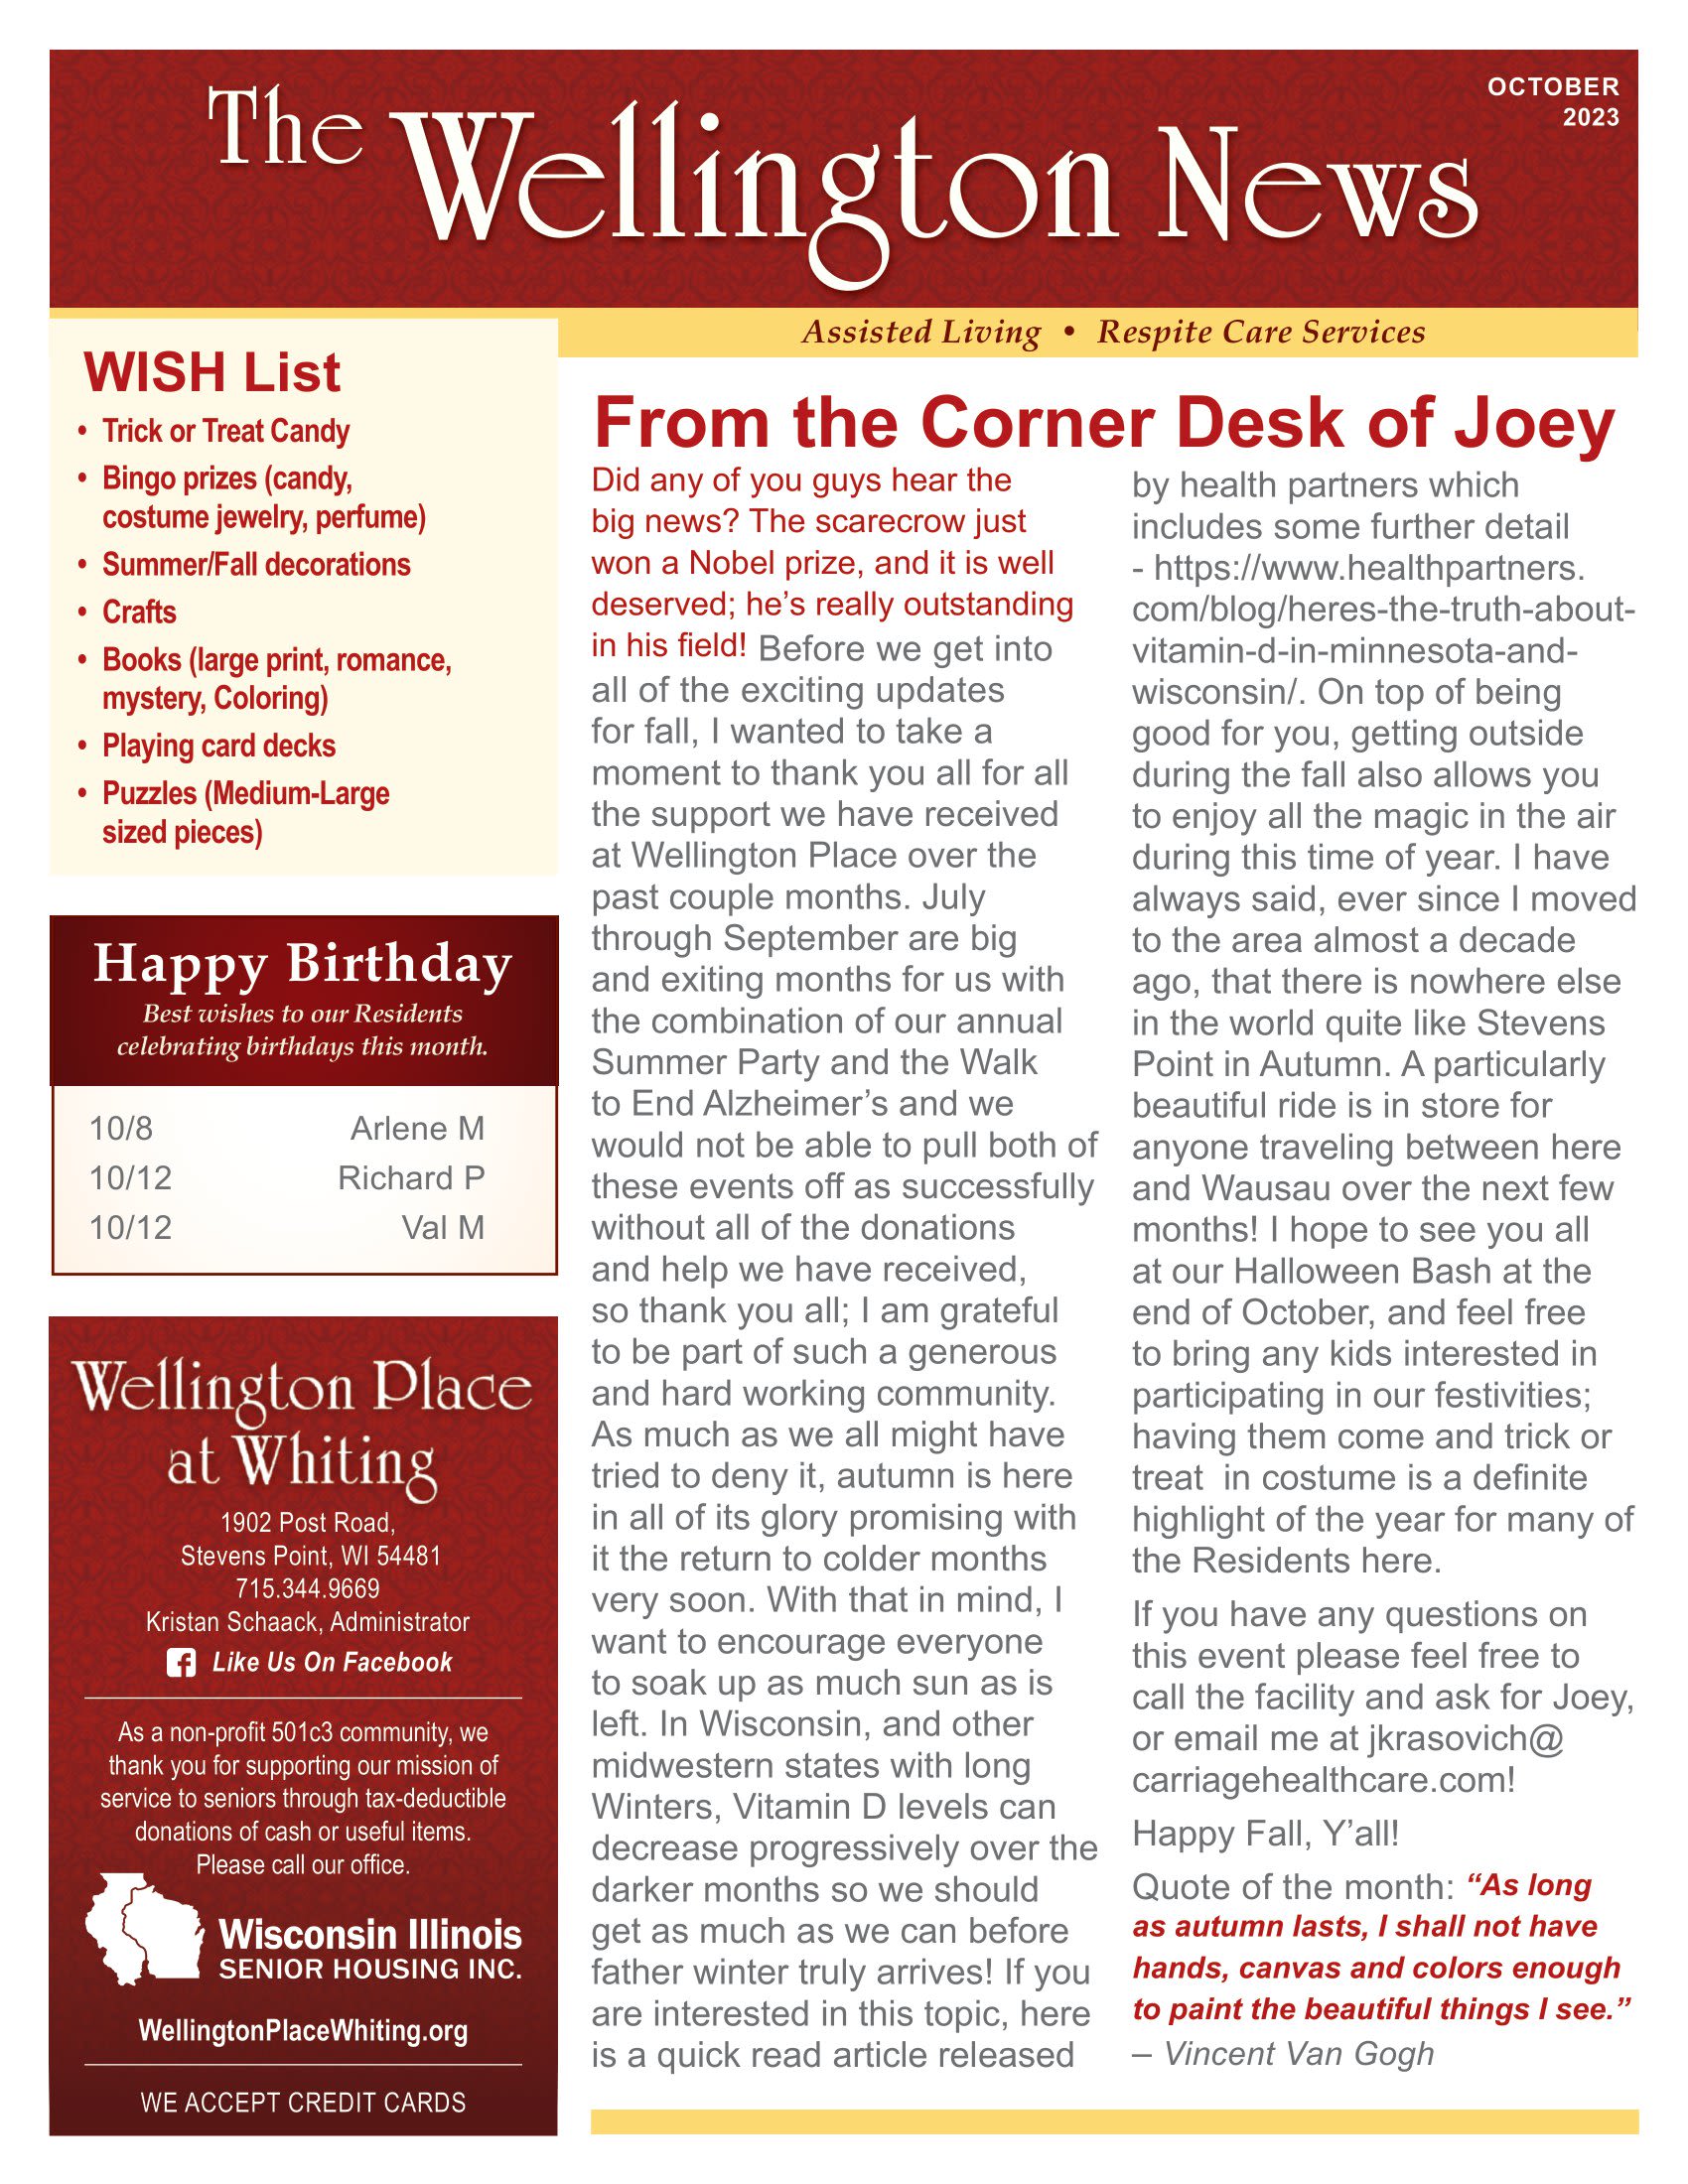 October 2023 newsletter at Wellington Place at Whiting in Stevens Point, Wisconsin